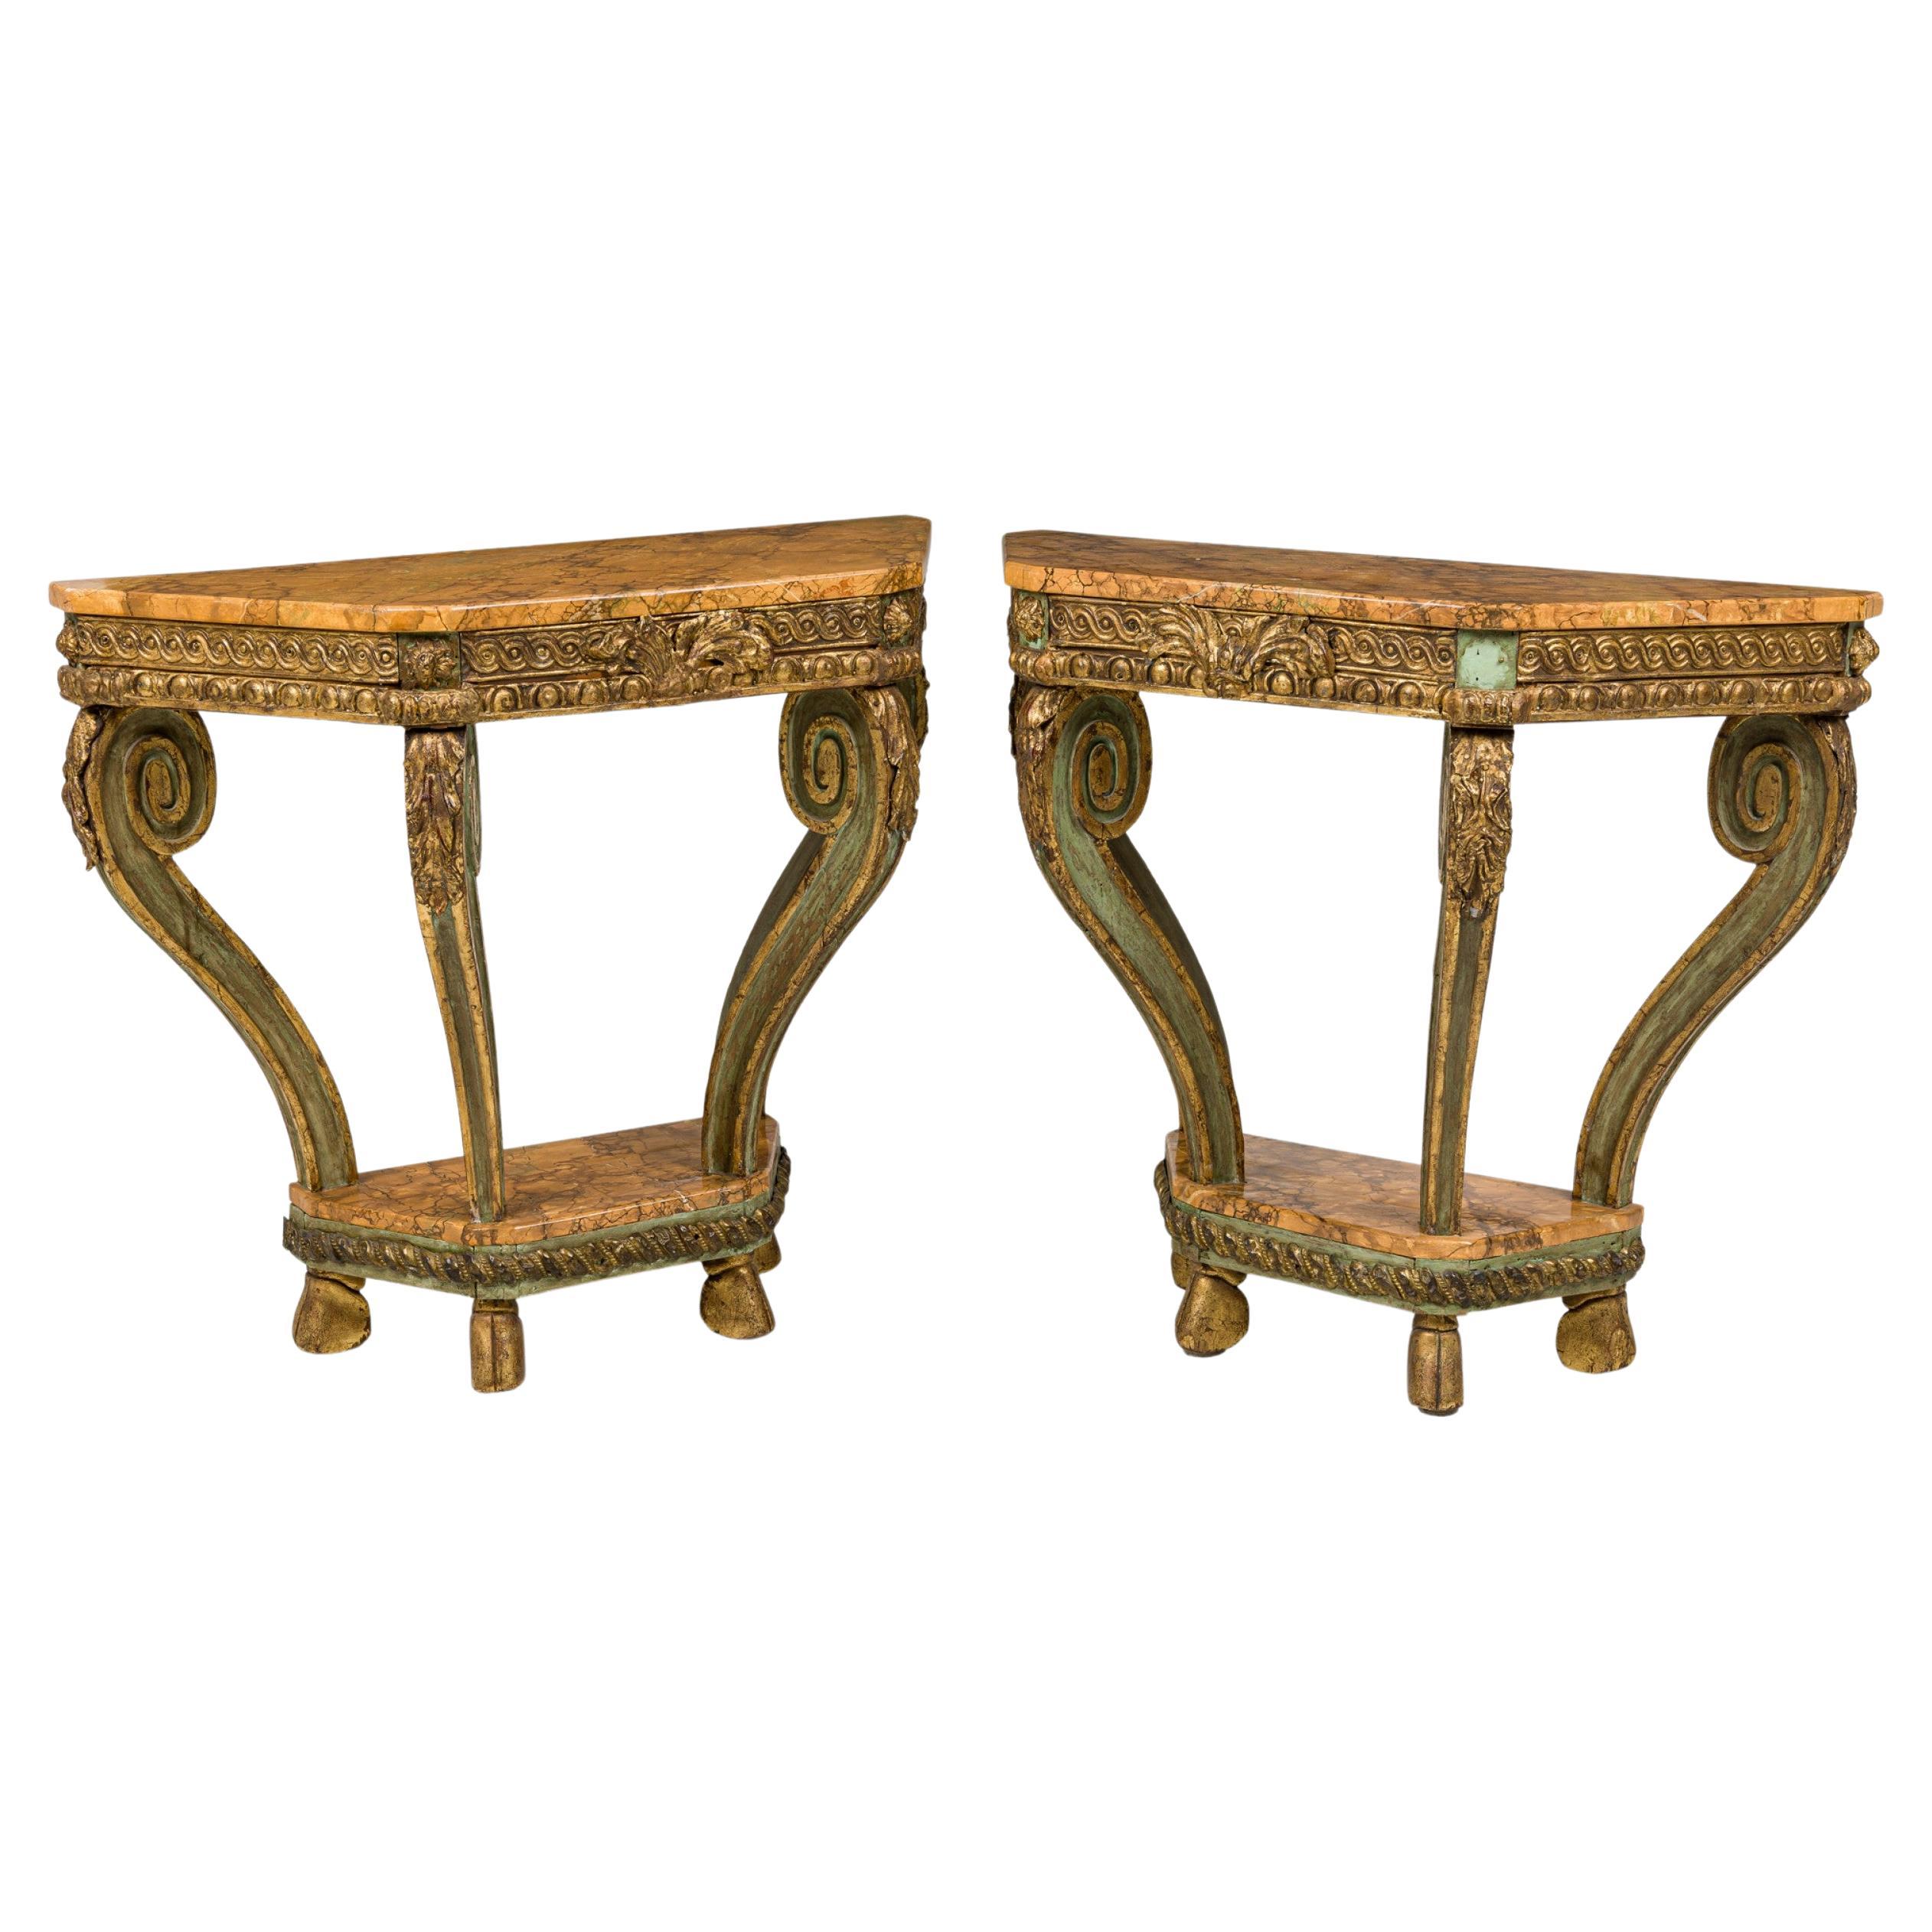 Pair of Italian Venetian Faux Marble Topped Scroll Form Carved Console Tables